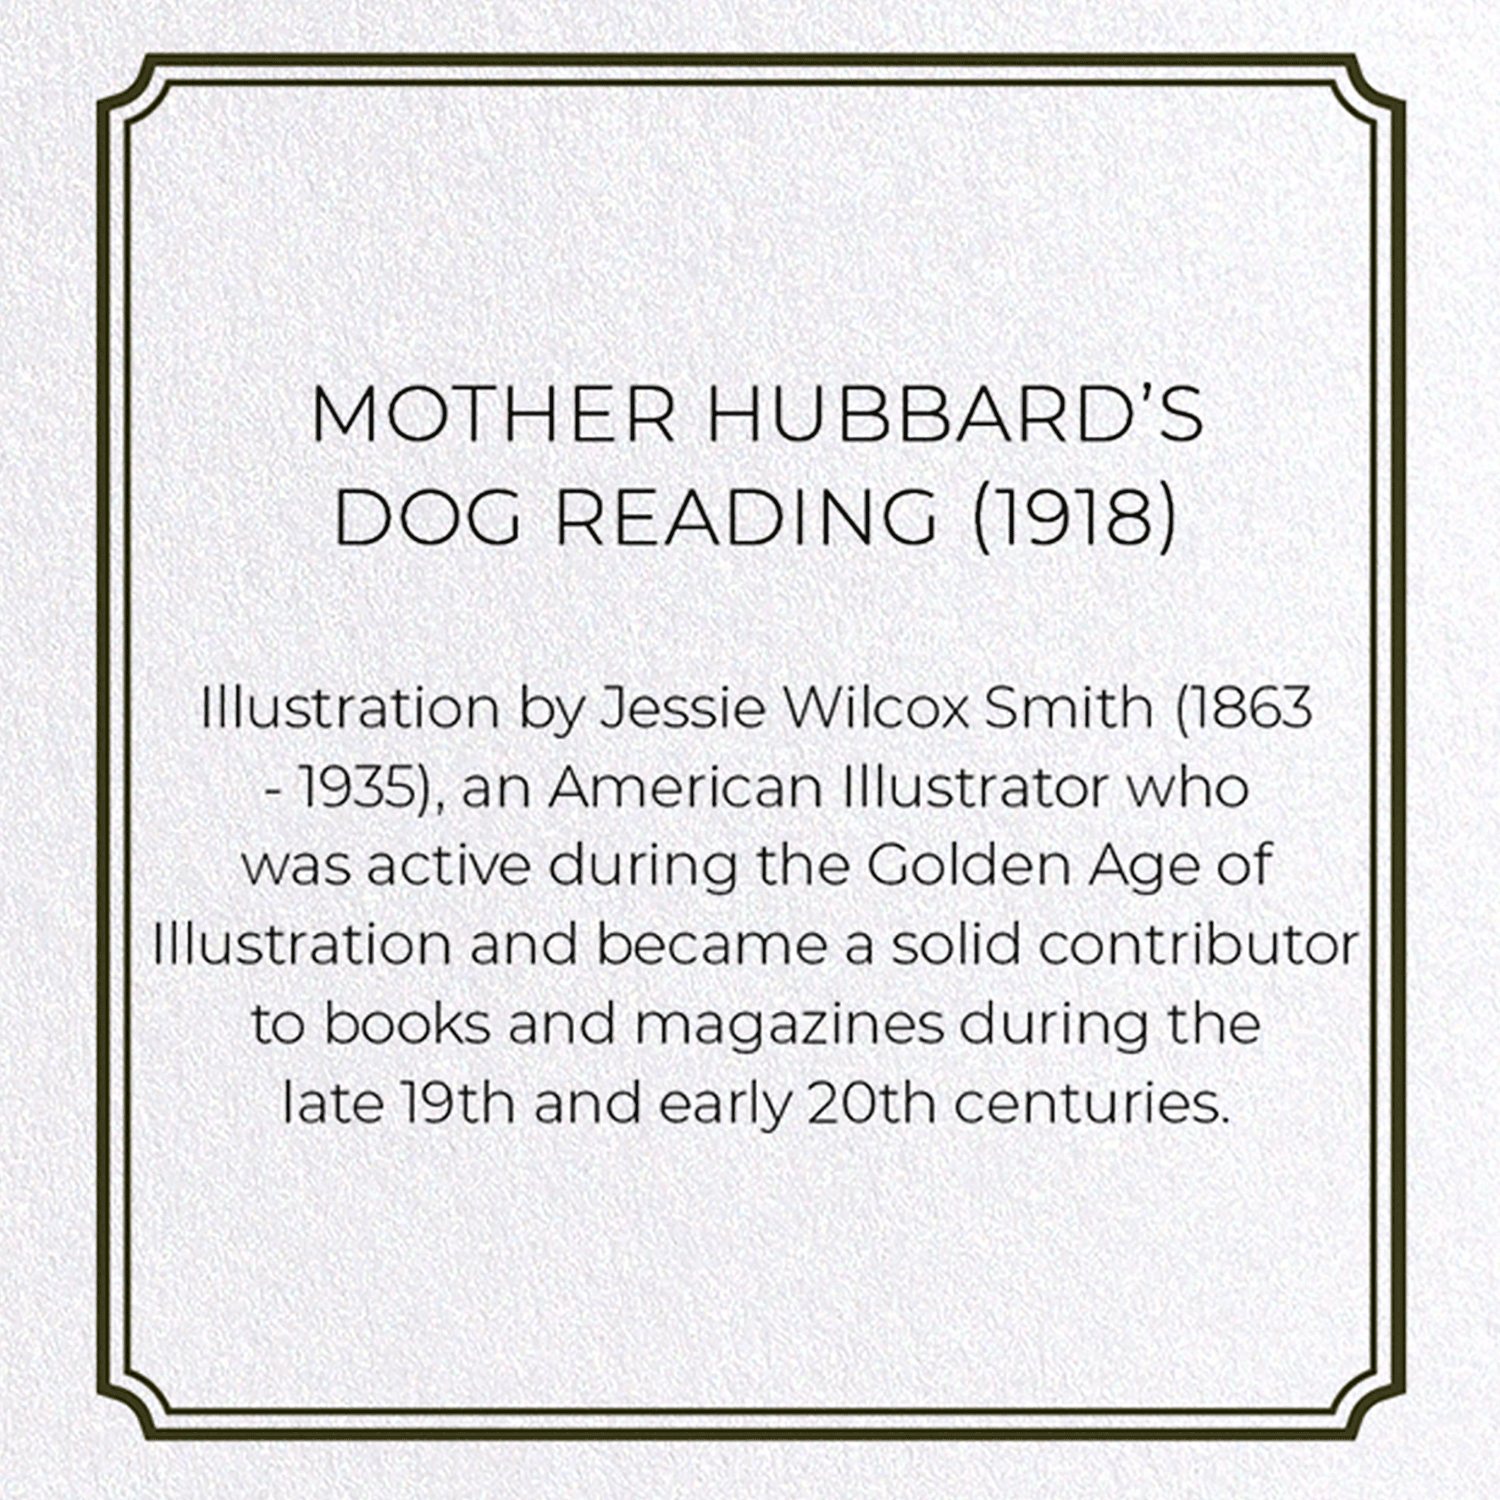 MOTHER HUBBARD’S DOG READING (1918)